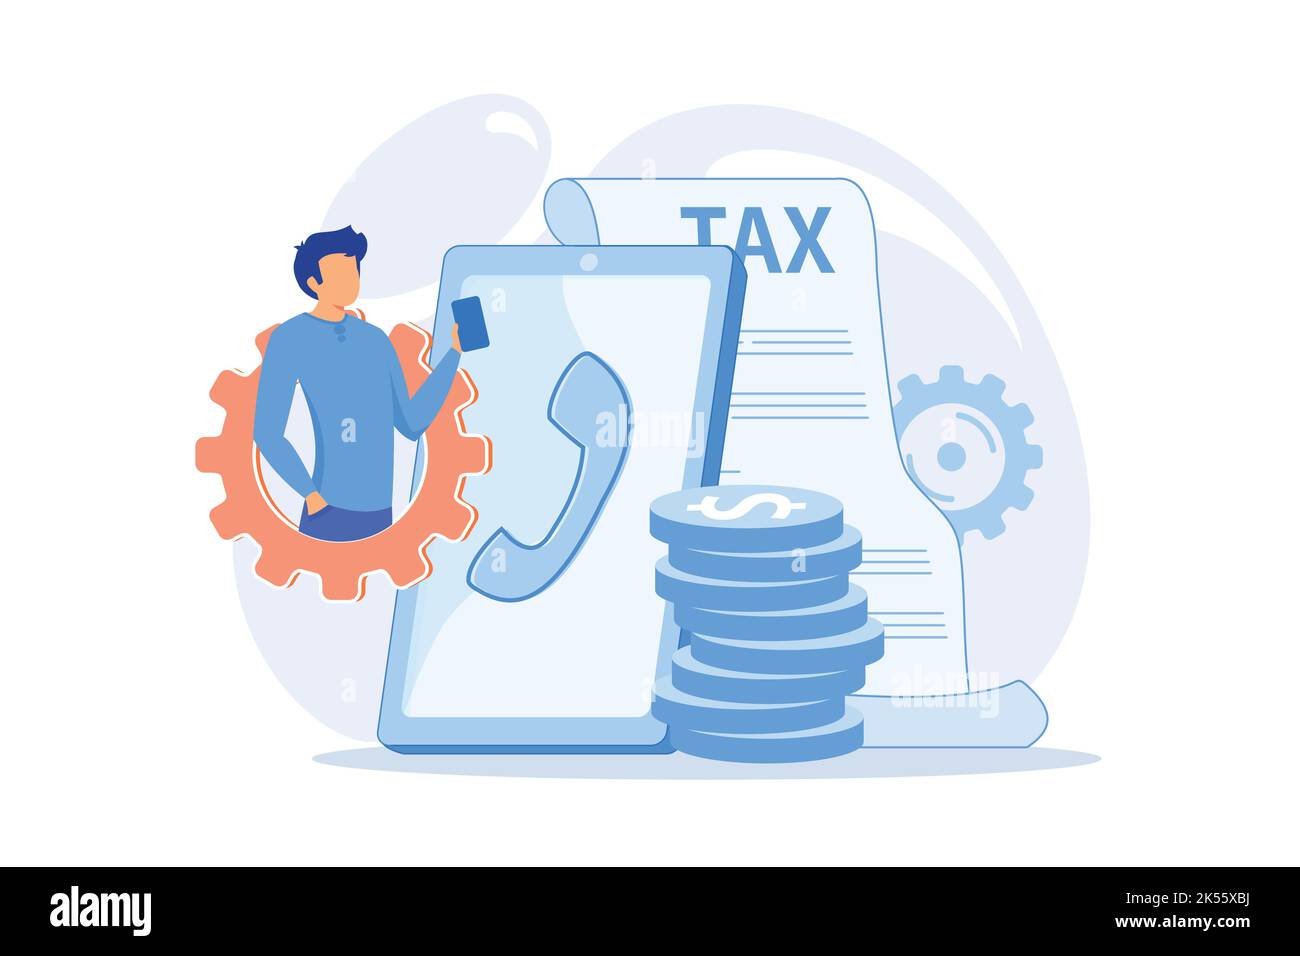 Pay call. Communicating through smartphone. Telephone contact, help line, client support. Solving problems with phone consultant. Talking on cellphone Stock Vector